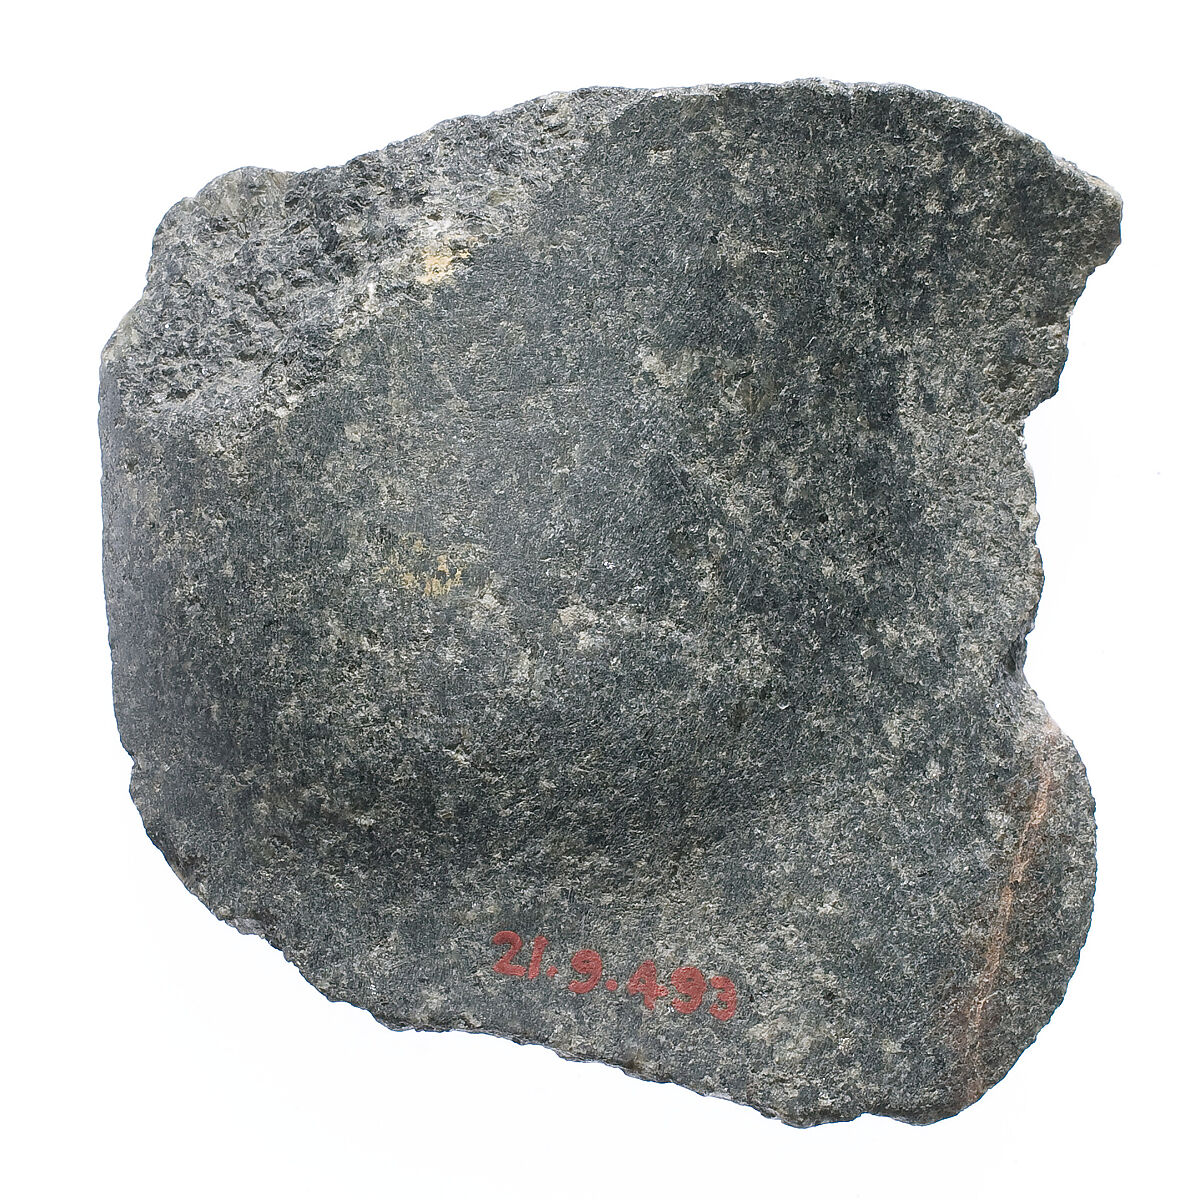 Joint, probably a knee, Diorite 